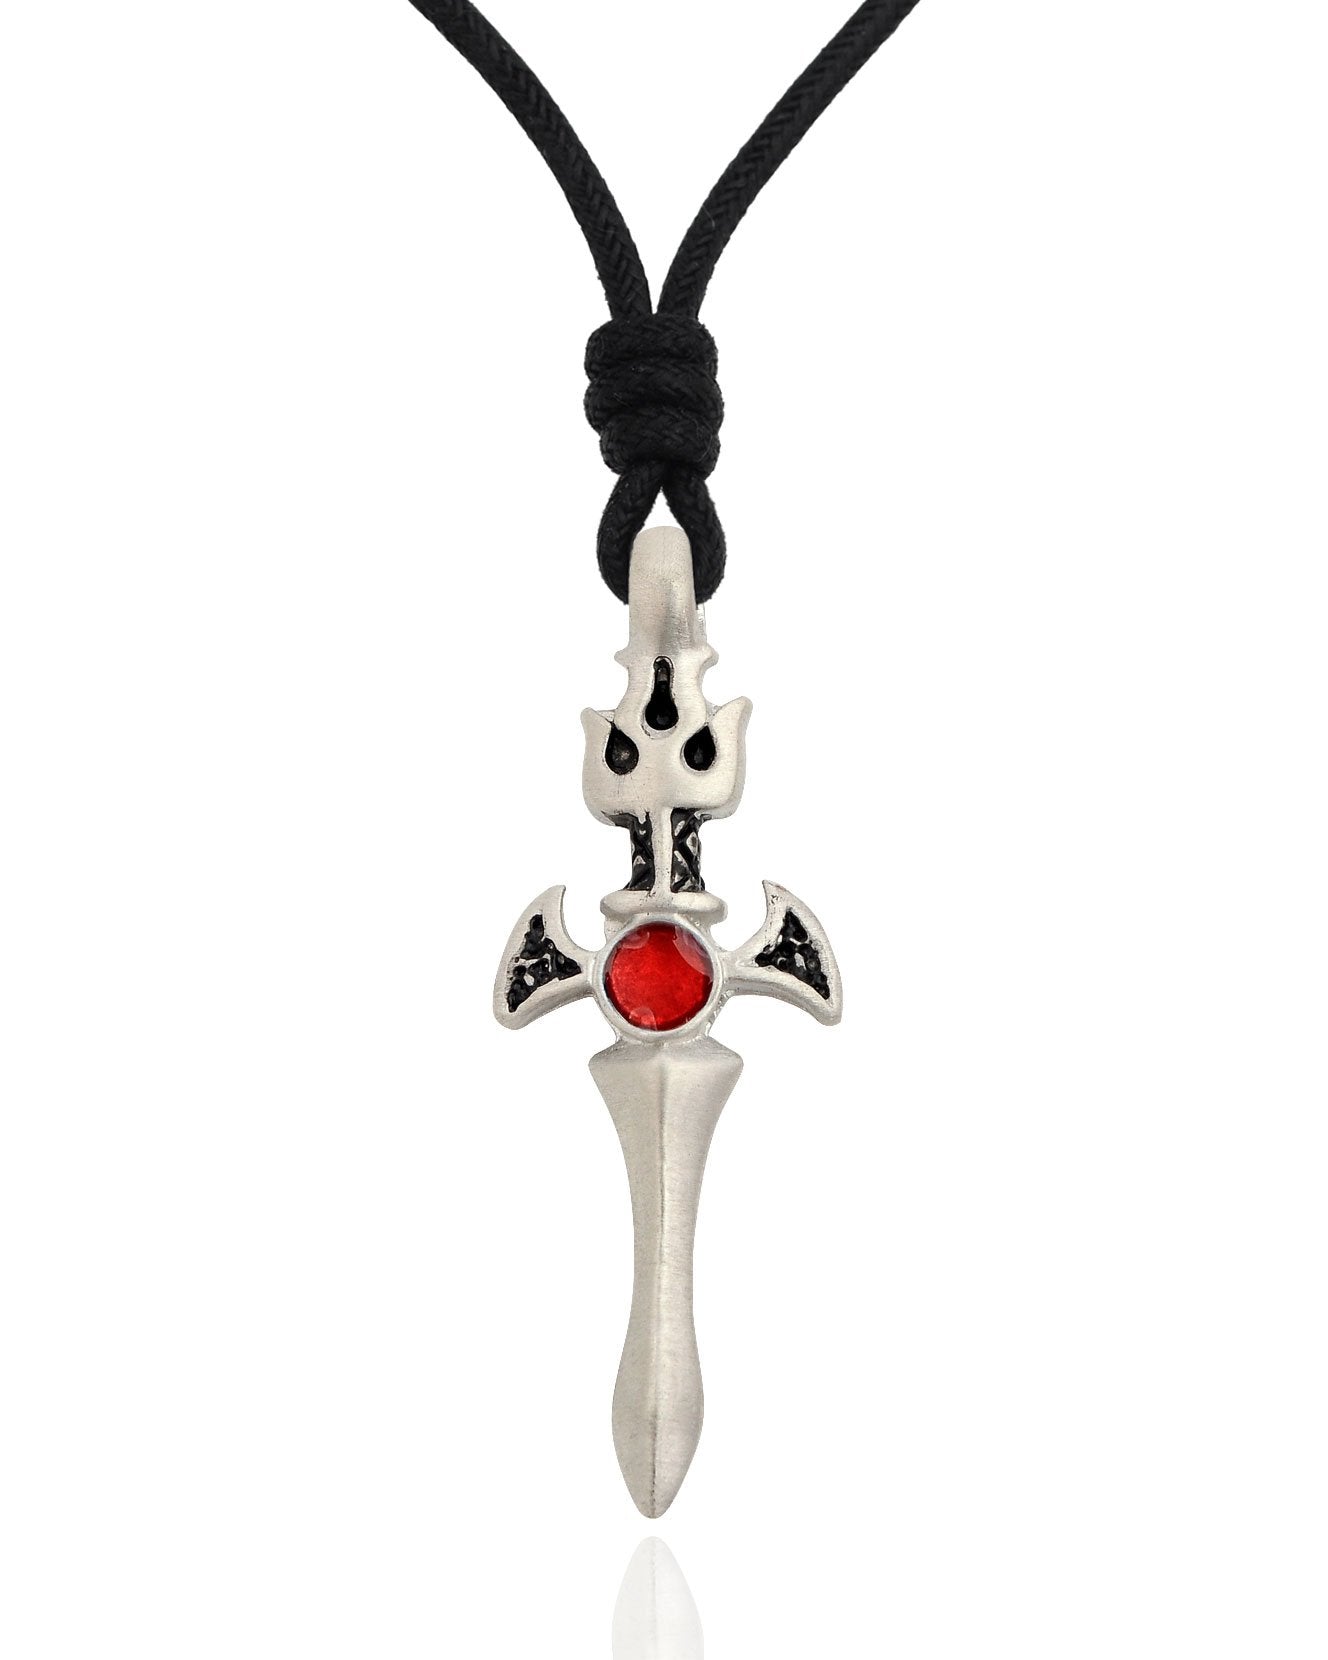 Colorful Fire Sword Silver Pewter Charm Necklace Pendant jewelry